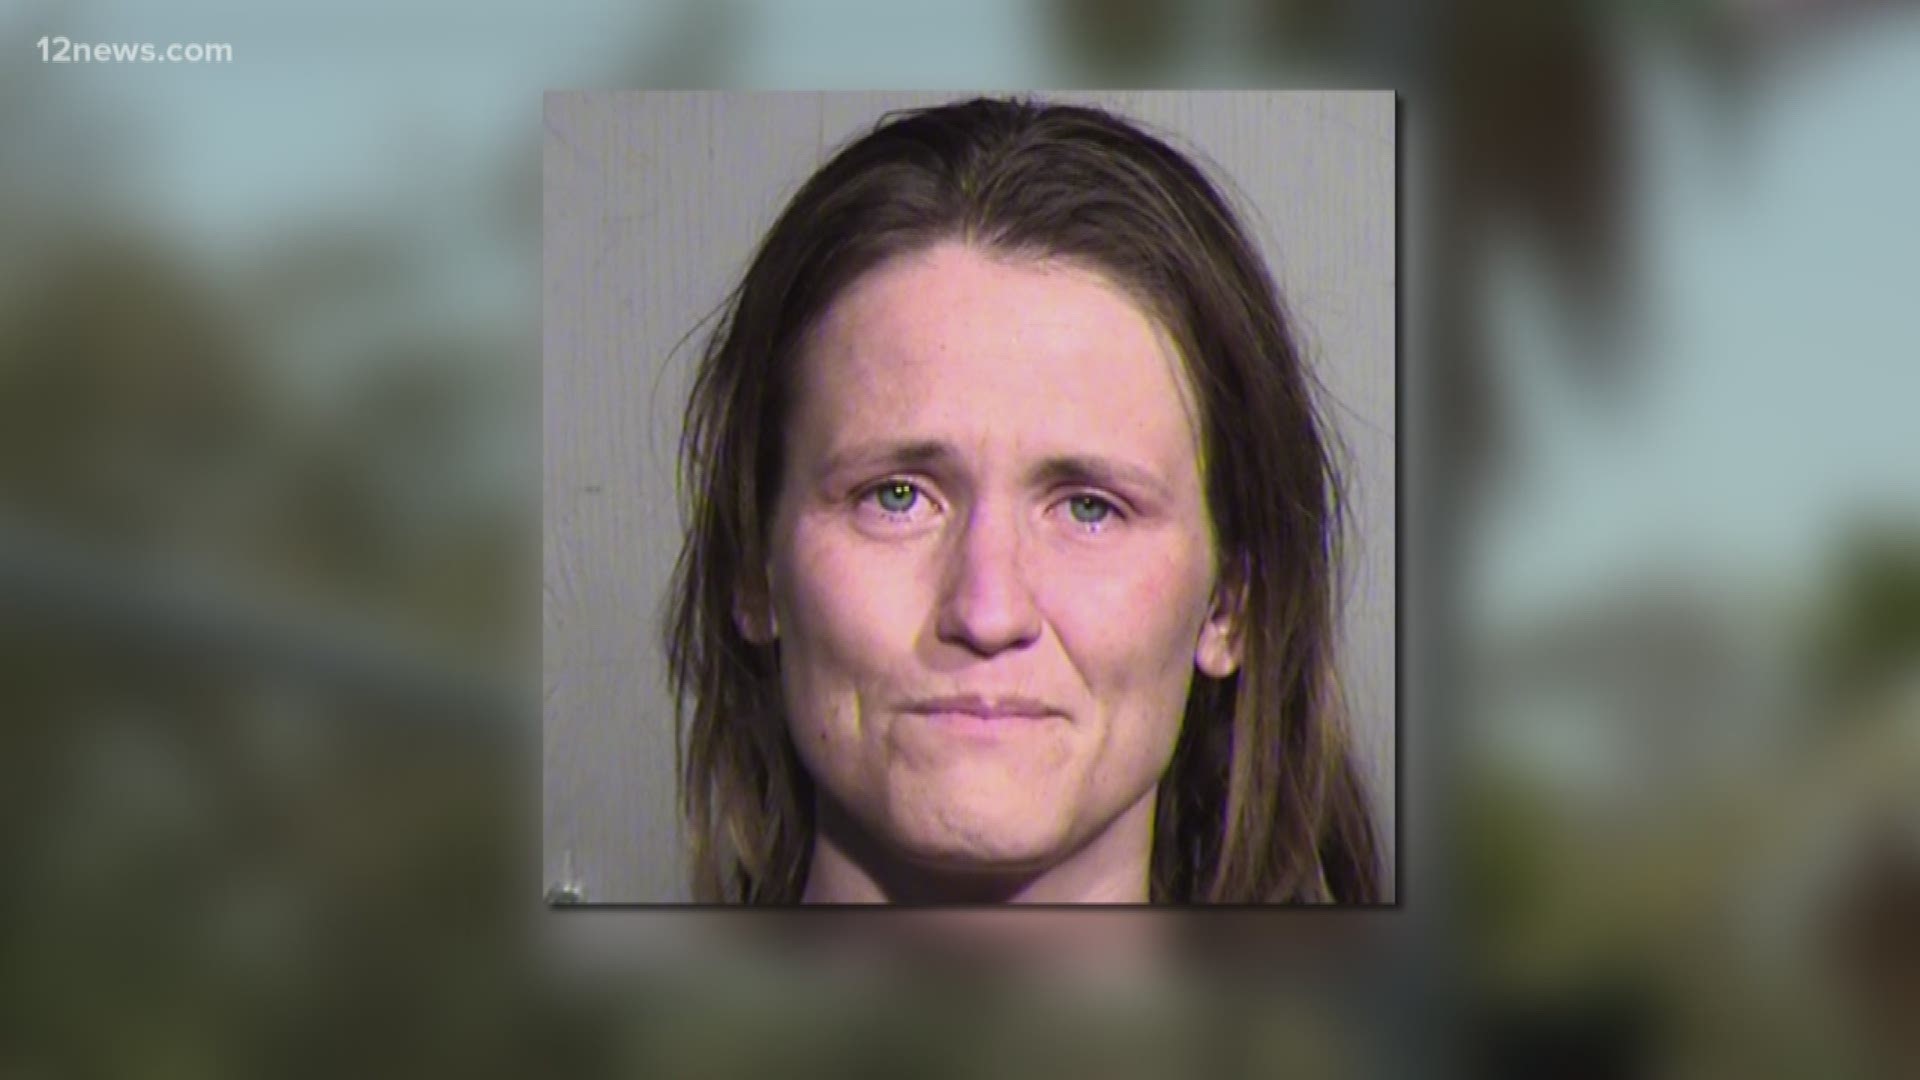 Police say a Peoria mom dropped off her 9-year-old son at a McDonald's Play Place so she could go gamble. Stacy Rupp told police she left her son to go grocery shopping but later admitted that she went to a nearby casino to gamble.